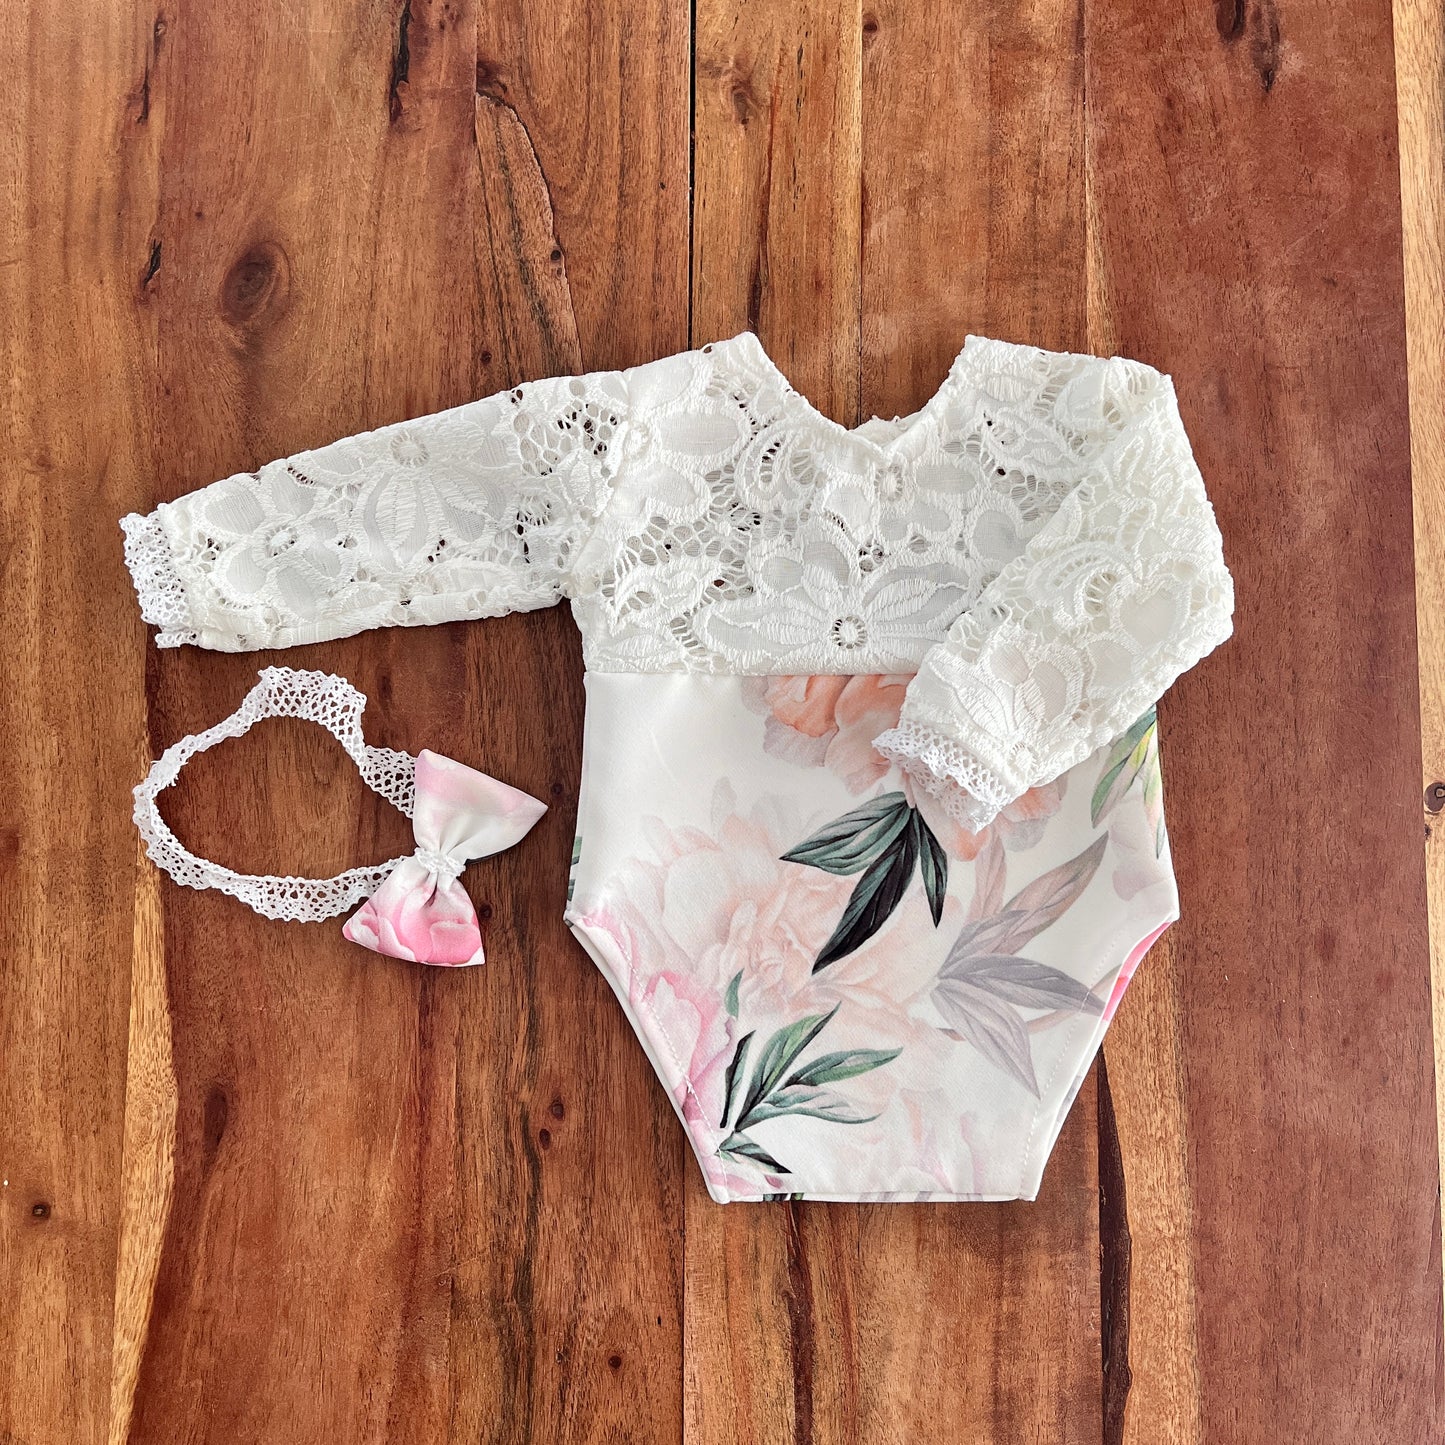 Mary white and flower Newborn Photography Prop Outfit For Girl